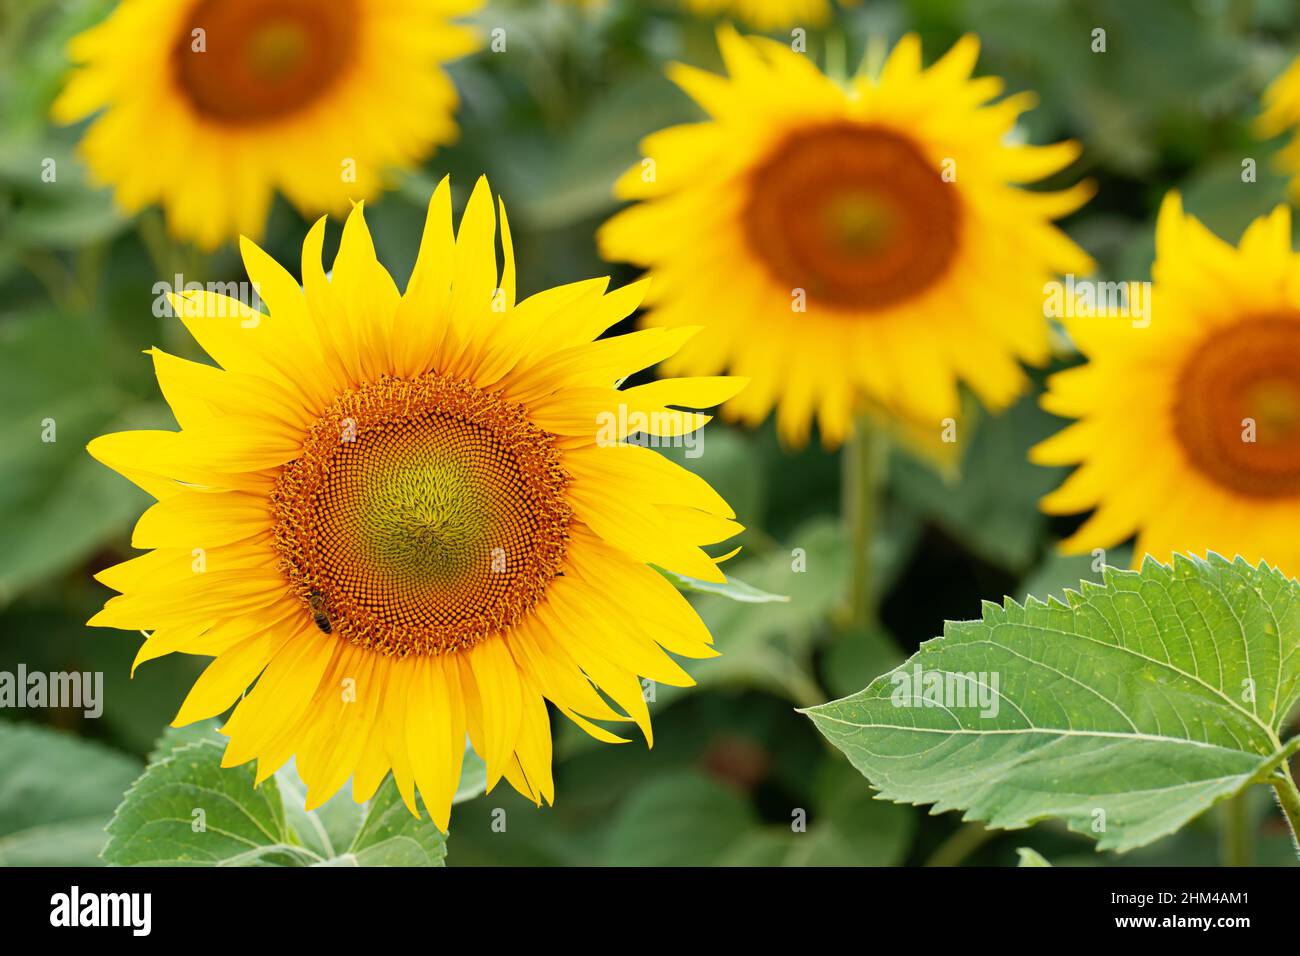 Close up on a bright sunflower on a hot summer day Stock Photo